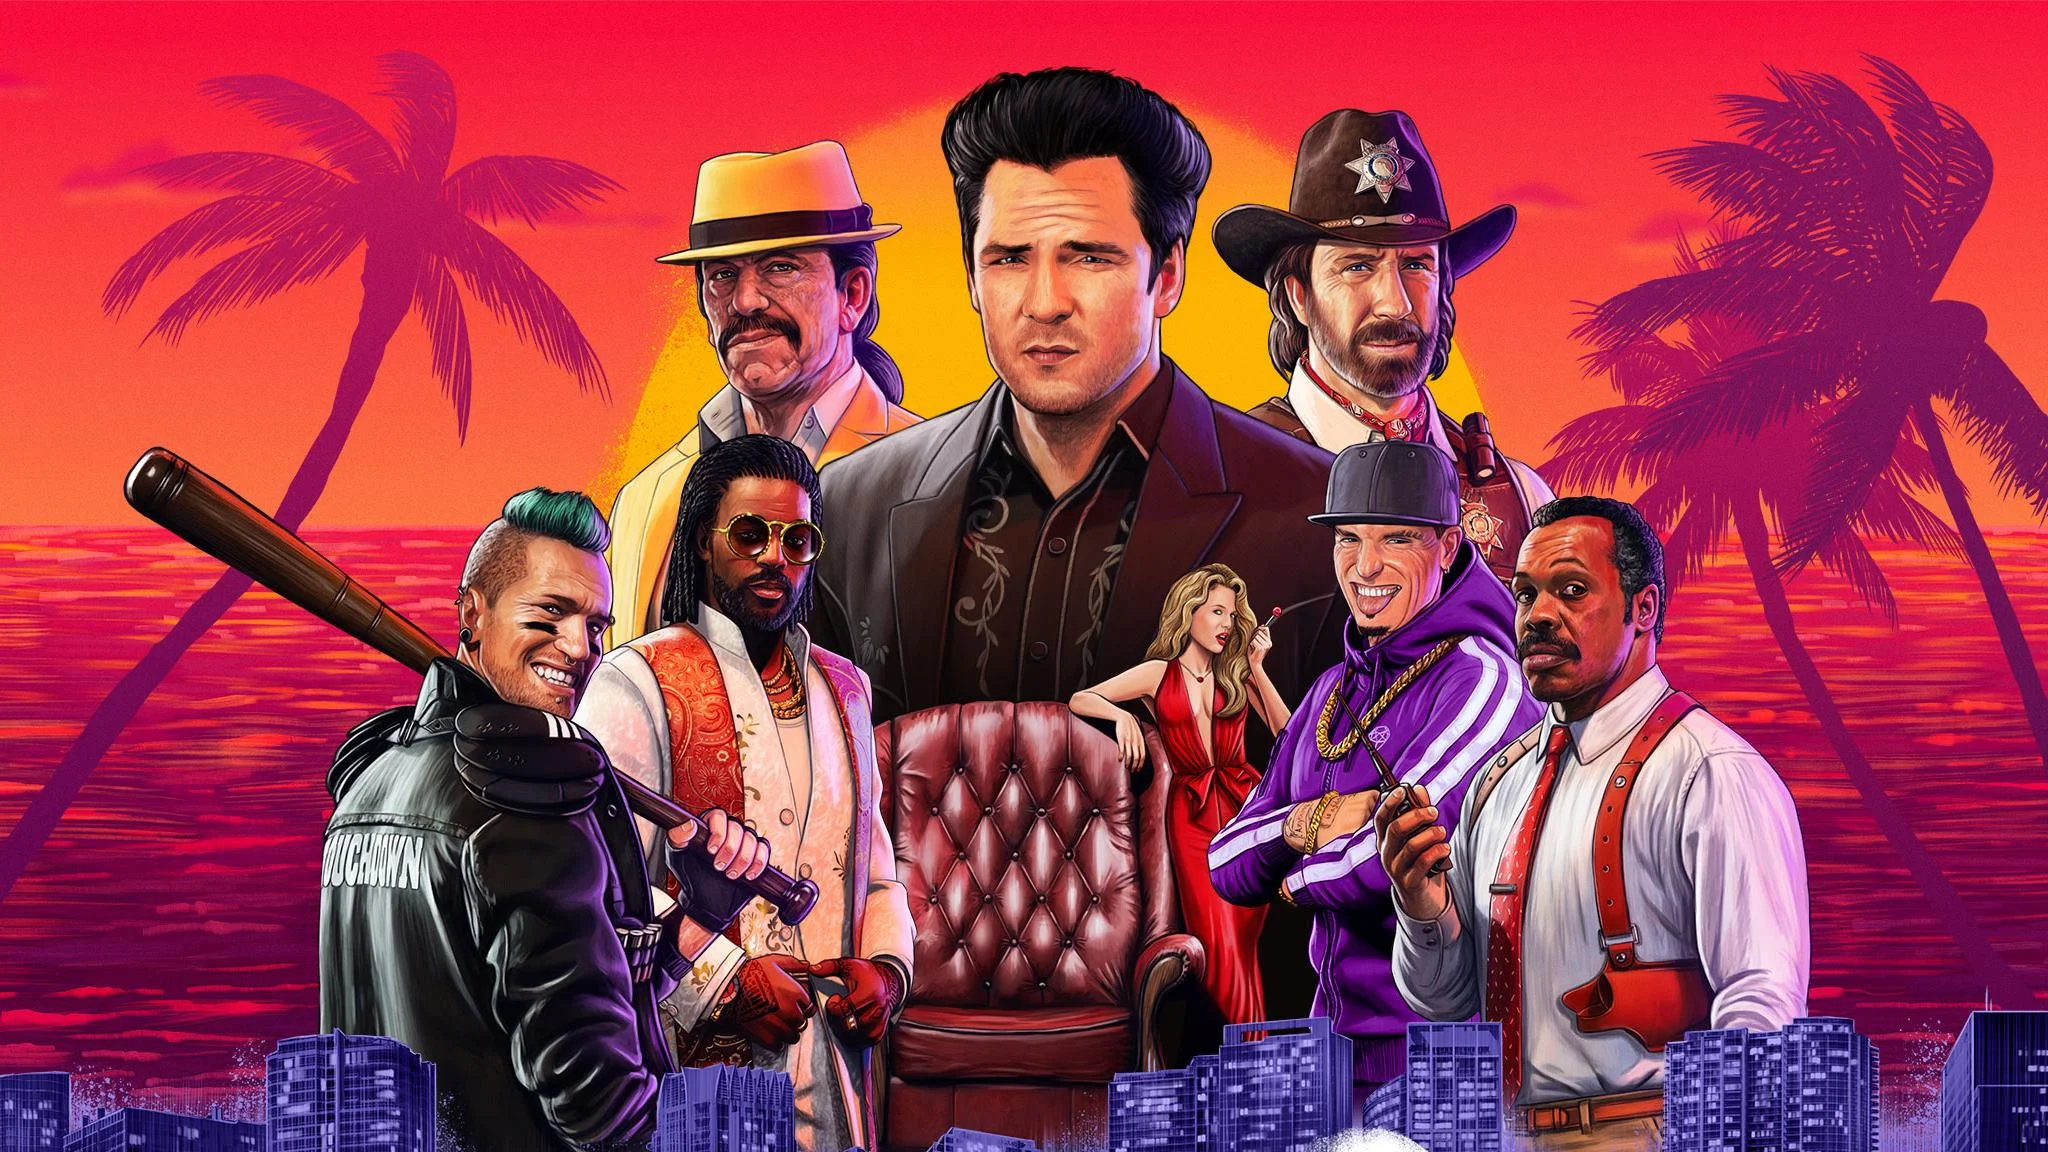 The old guys are back in business. The release trailer for Crime Boss: Rockay City, an action game with action movie stars from the 80s and 90s, has been released